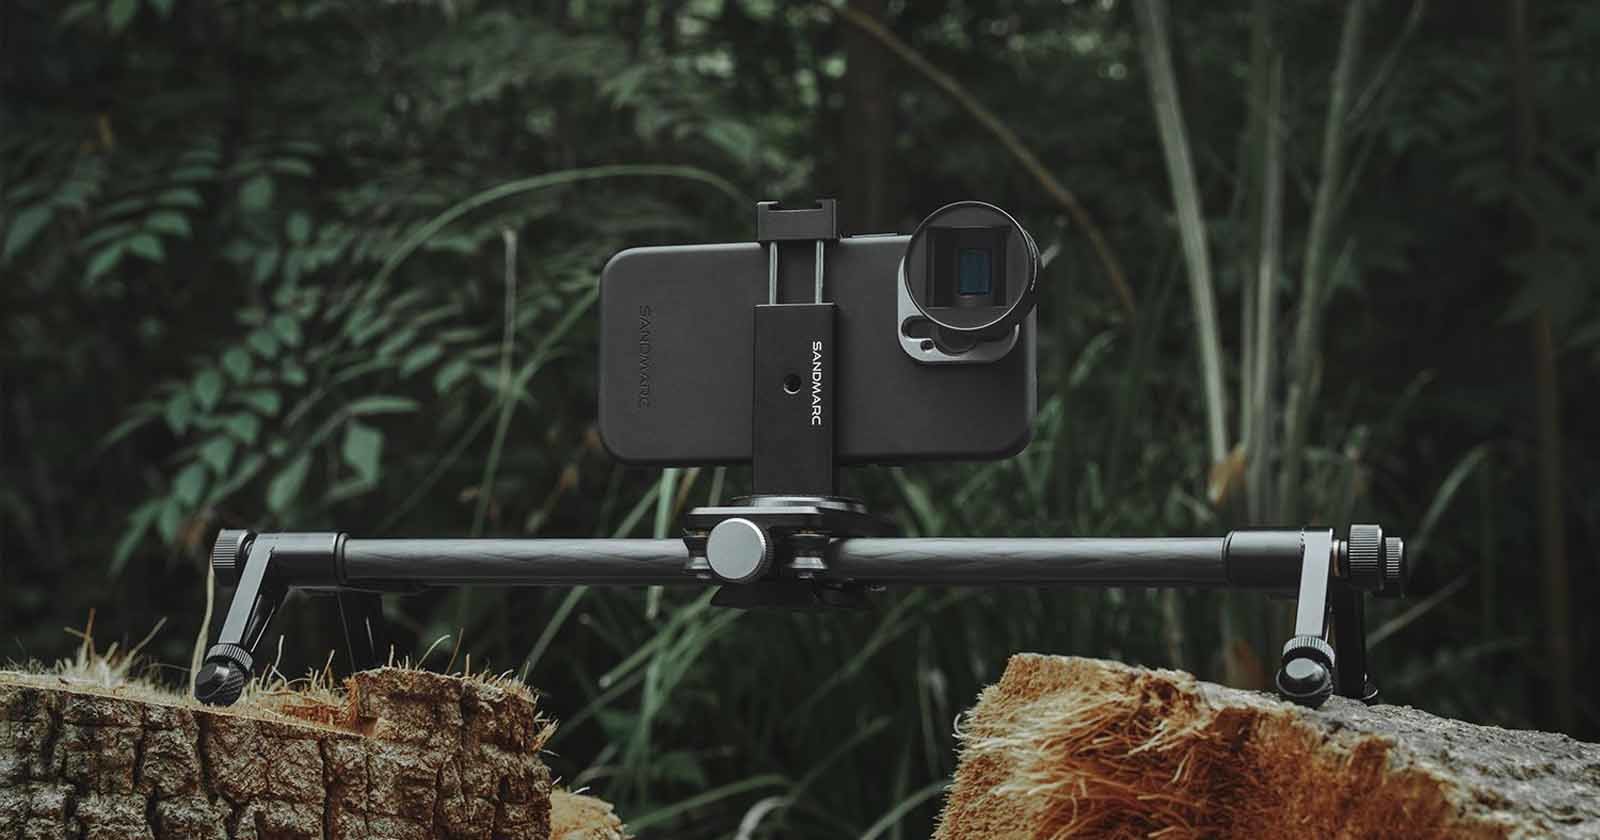 Sandmarcs New Mini Slider is Made for the iPhone and Action Cameras